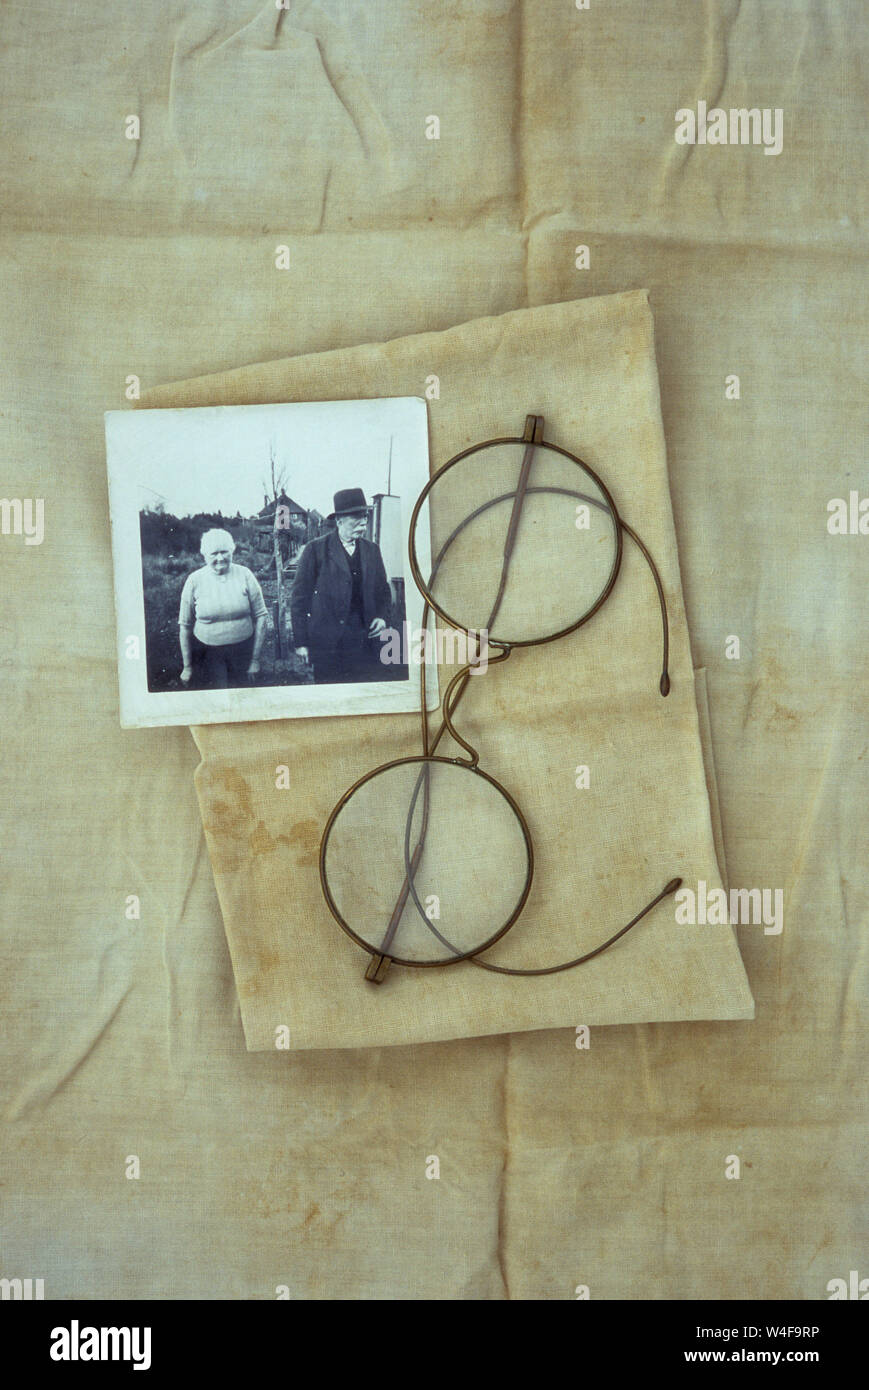 Antique spectacles with circular lenses and wire frames lying on stained and folded linen with black and white photo of elderly 1930s couple Stock Photo